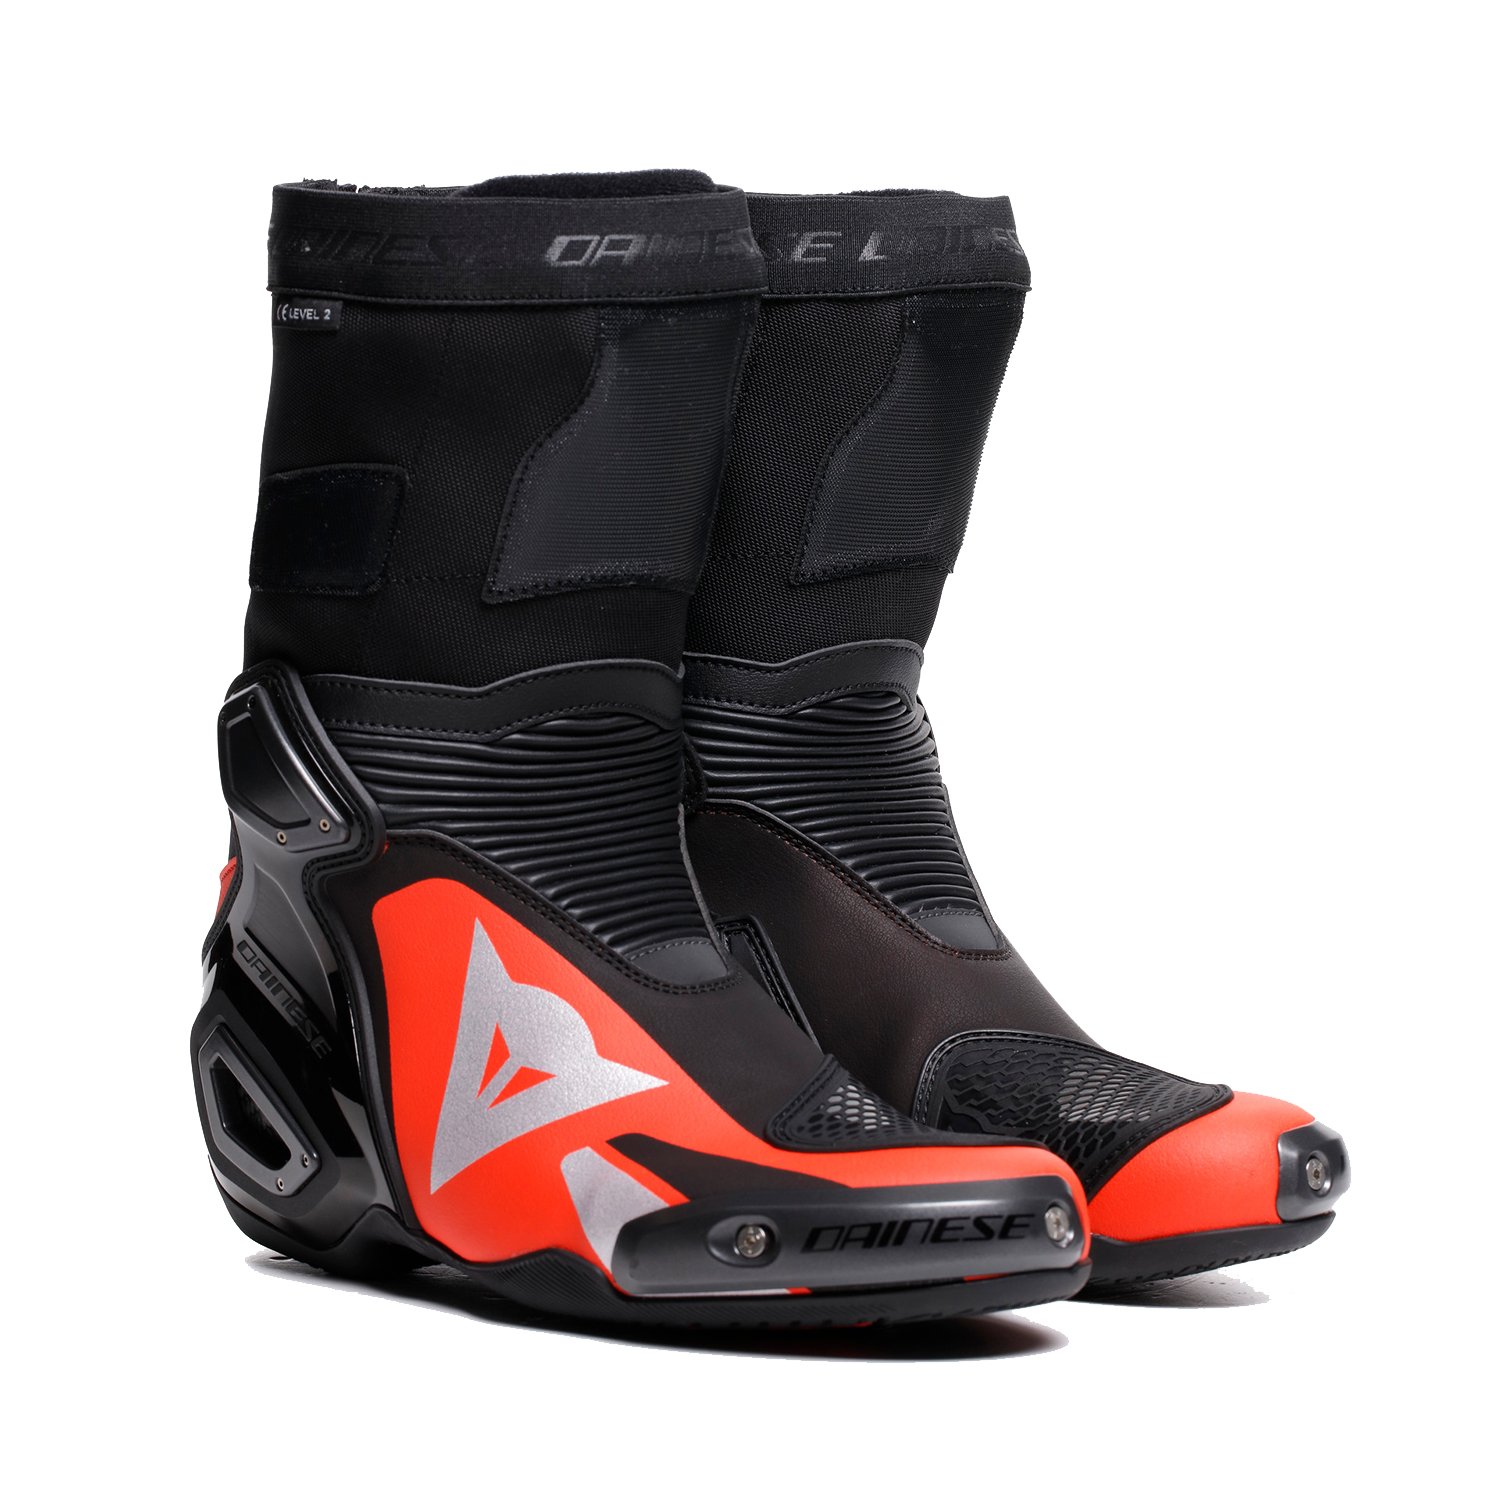 Image of Dainese Axial 2 Boots Black Red Fluo Talla 40